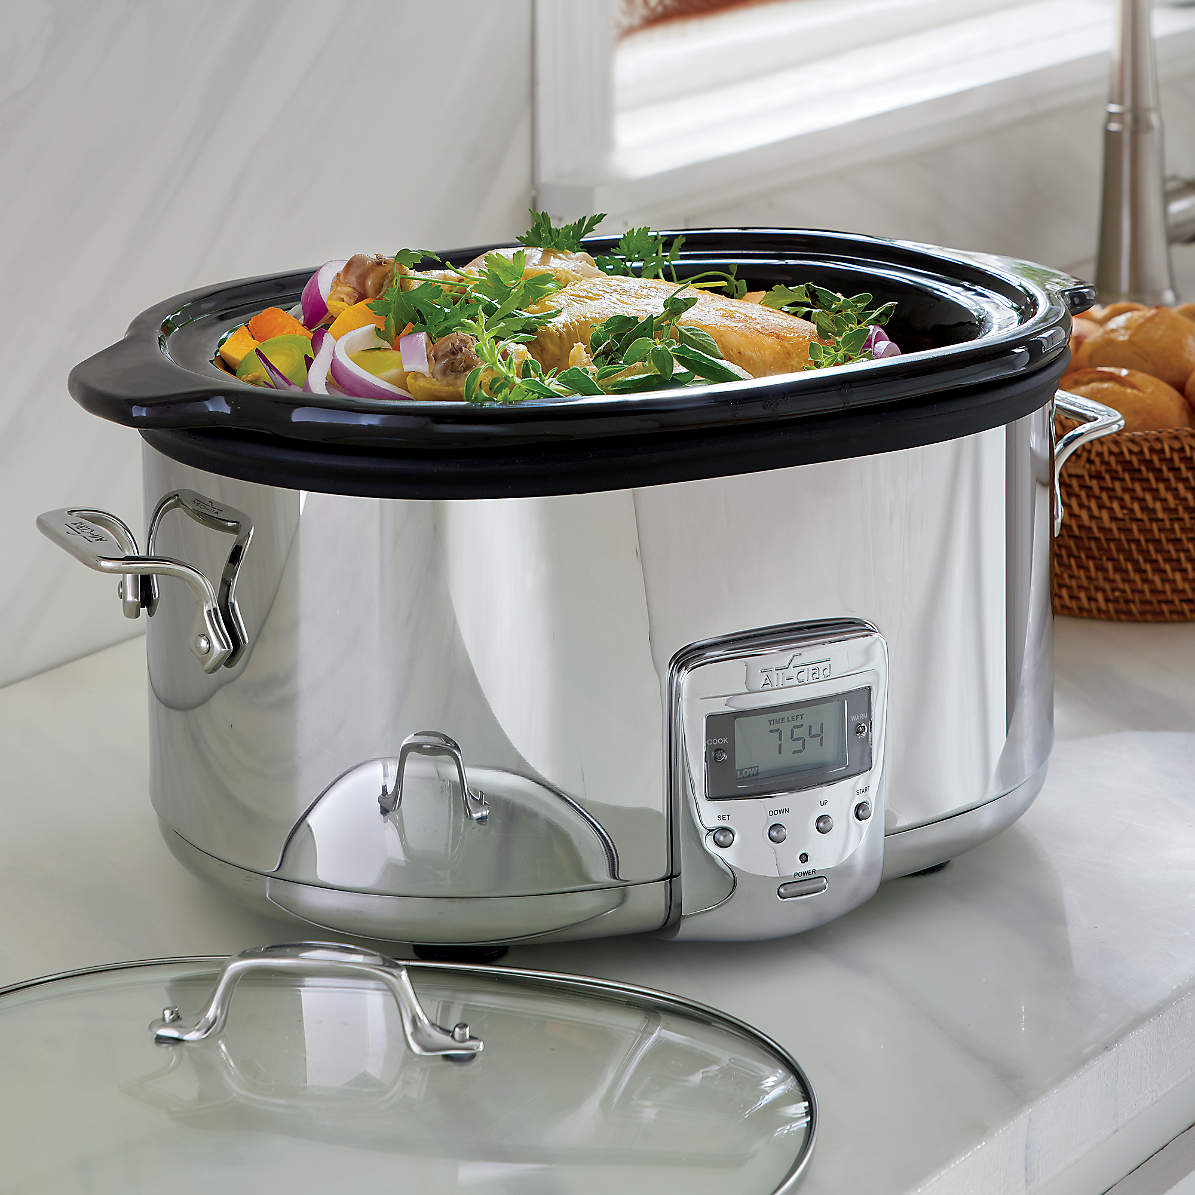 6-Quart Slow Cooker with Solid Glass Lid